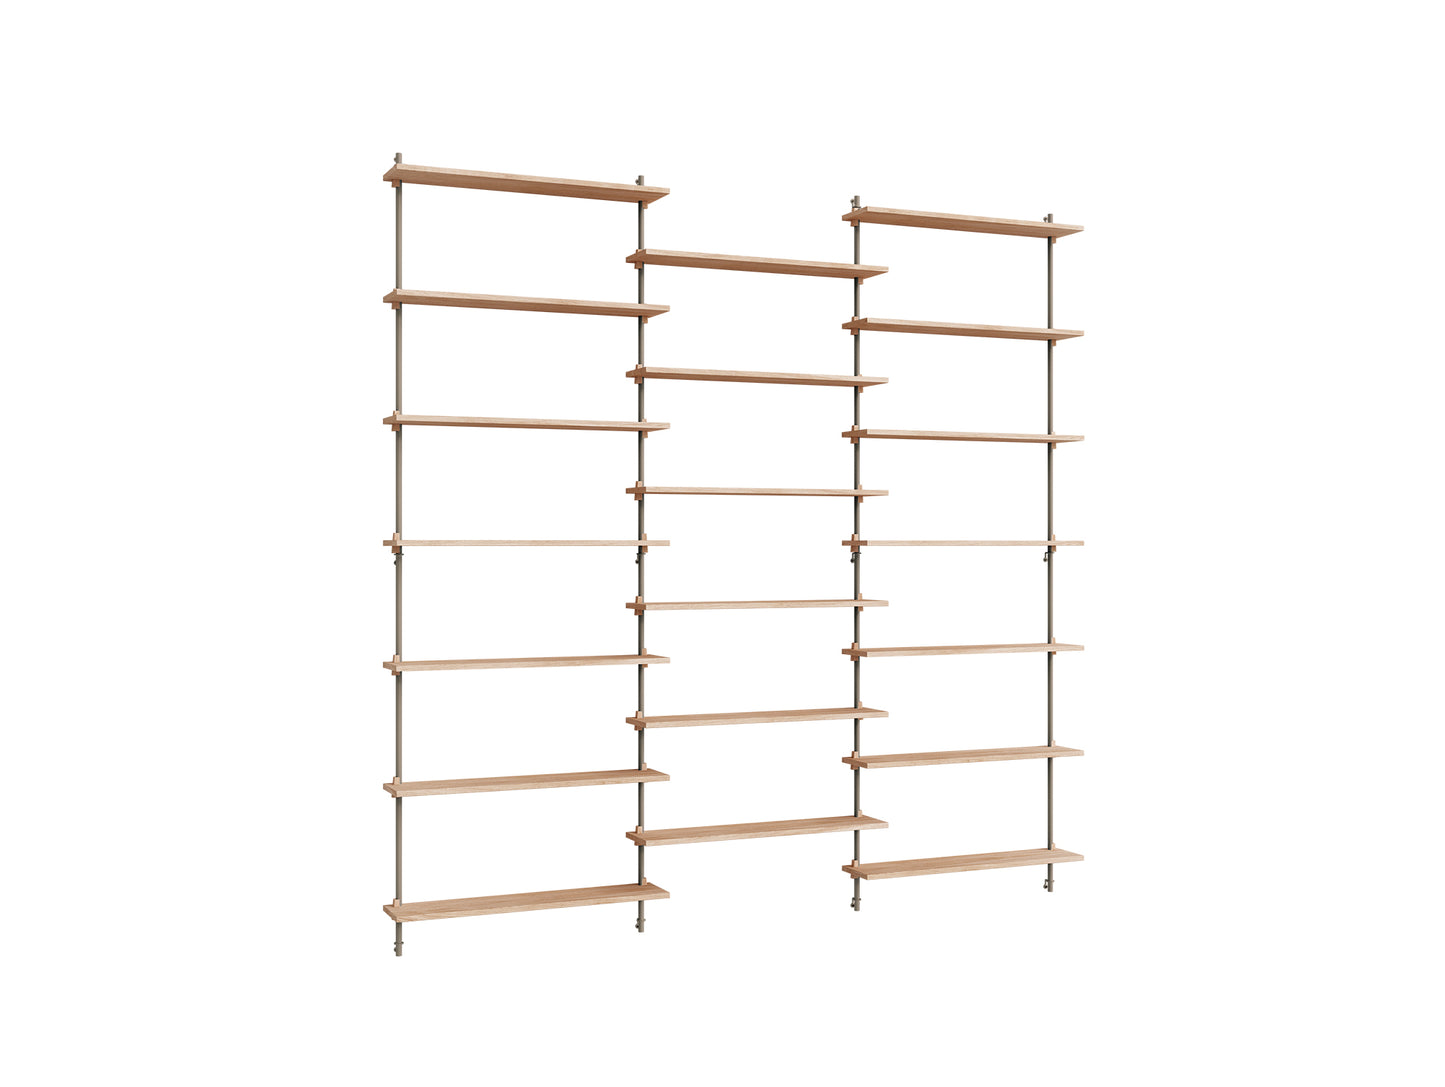 Wall Shelving System Sets (230 cm) by Moebe - WS.230.3 / Warm Grey Uprights / Oiled Oak